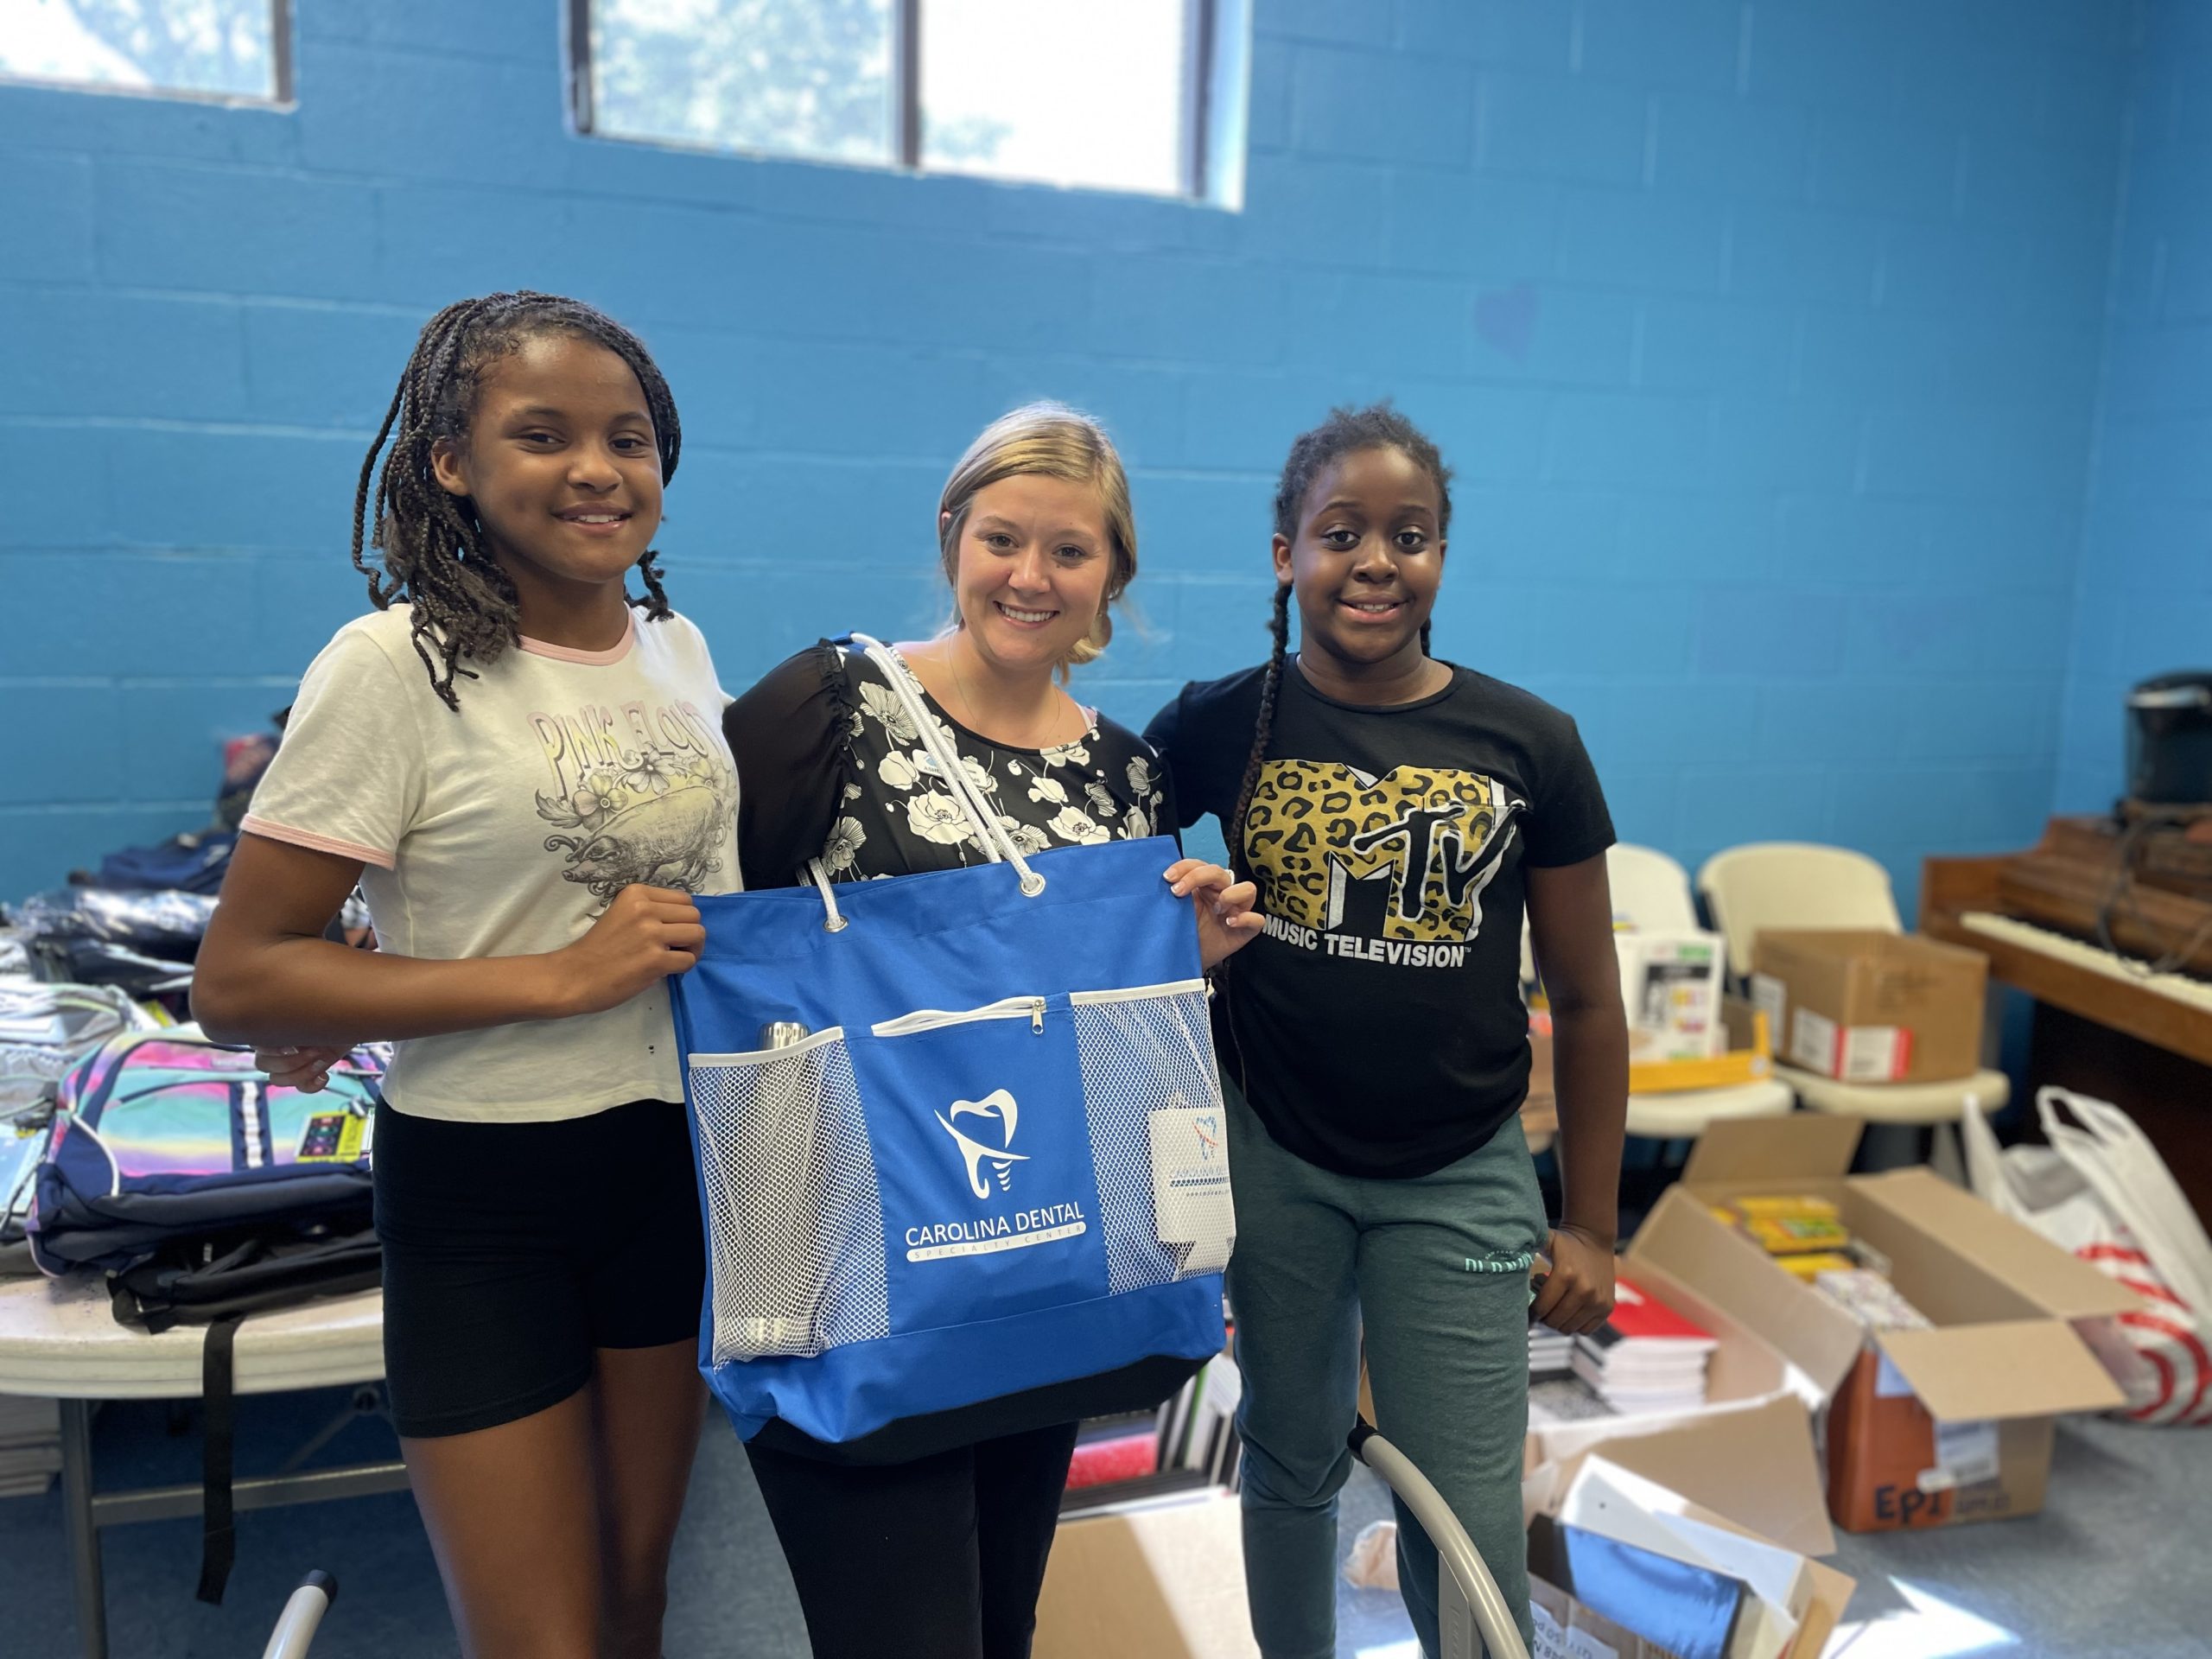 Carolina DSC helps Wilmington Boys and Girls Club’s campaign raise school supplies for 2,200 NC students during annual supply drive